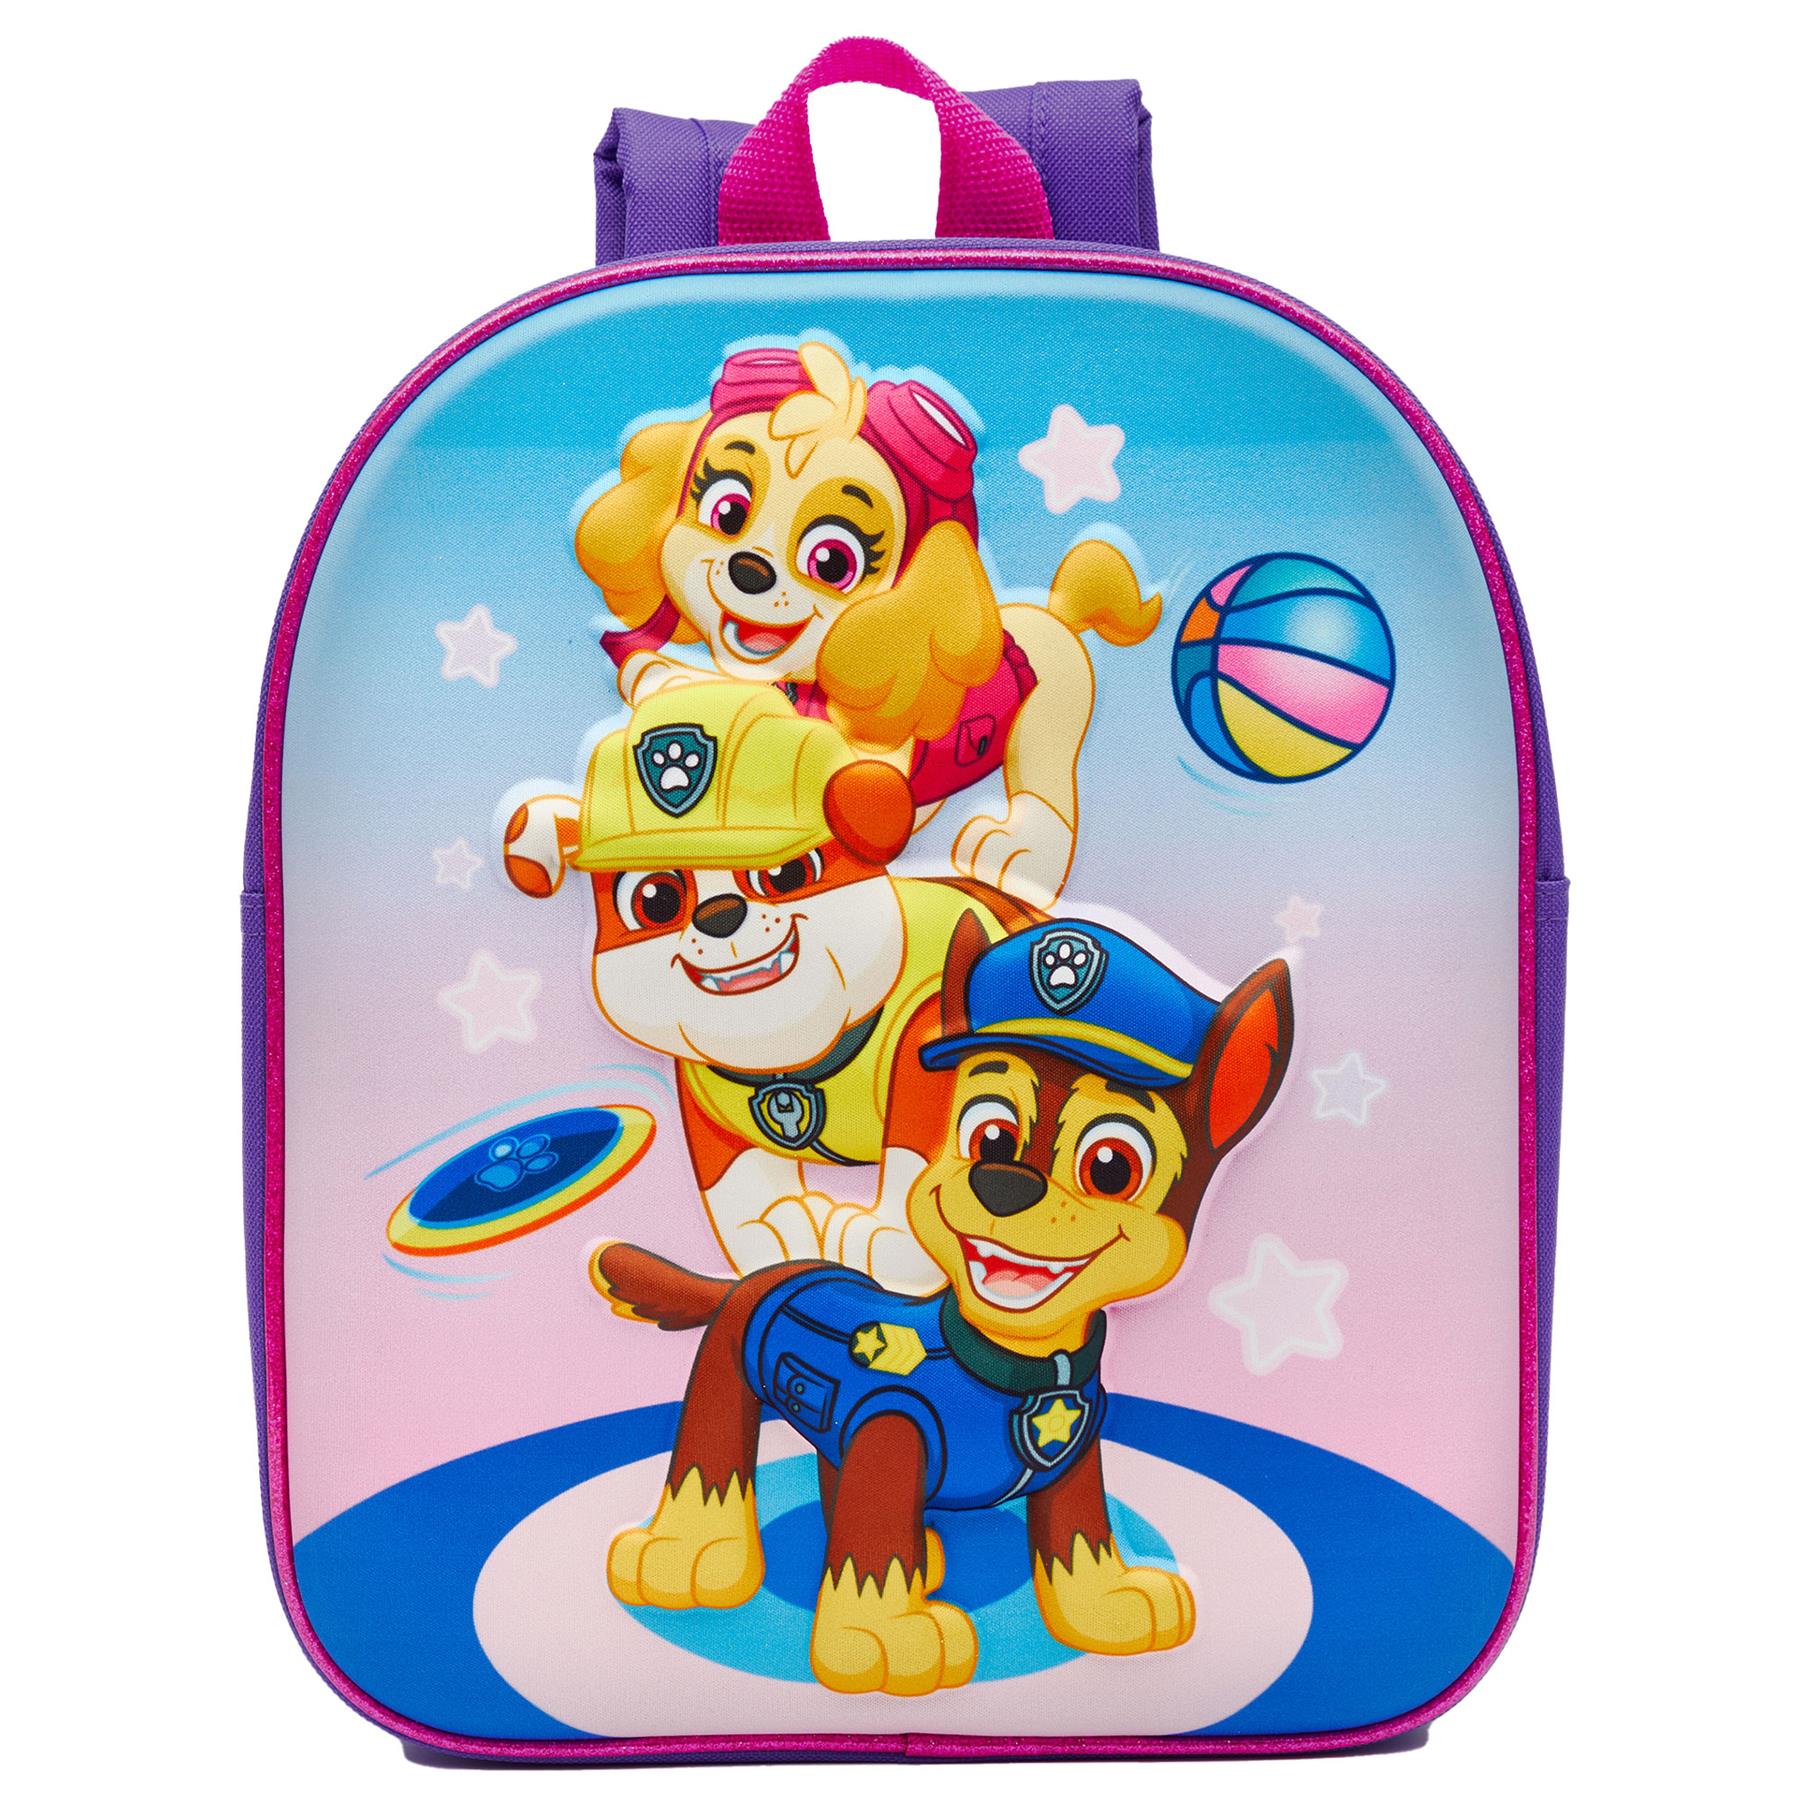 Officially Licensed Paw Patrol Playtime Fun Eva Character School Travel Backpack